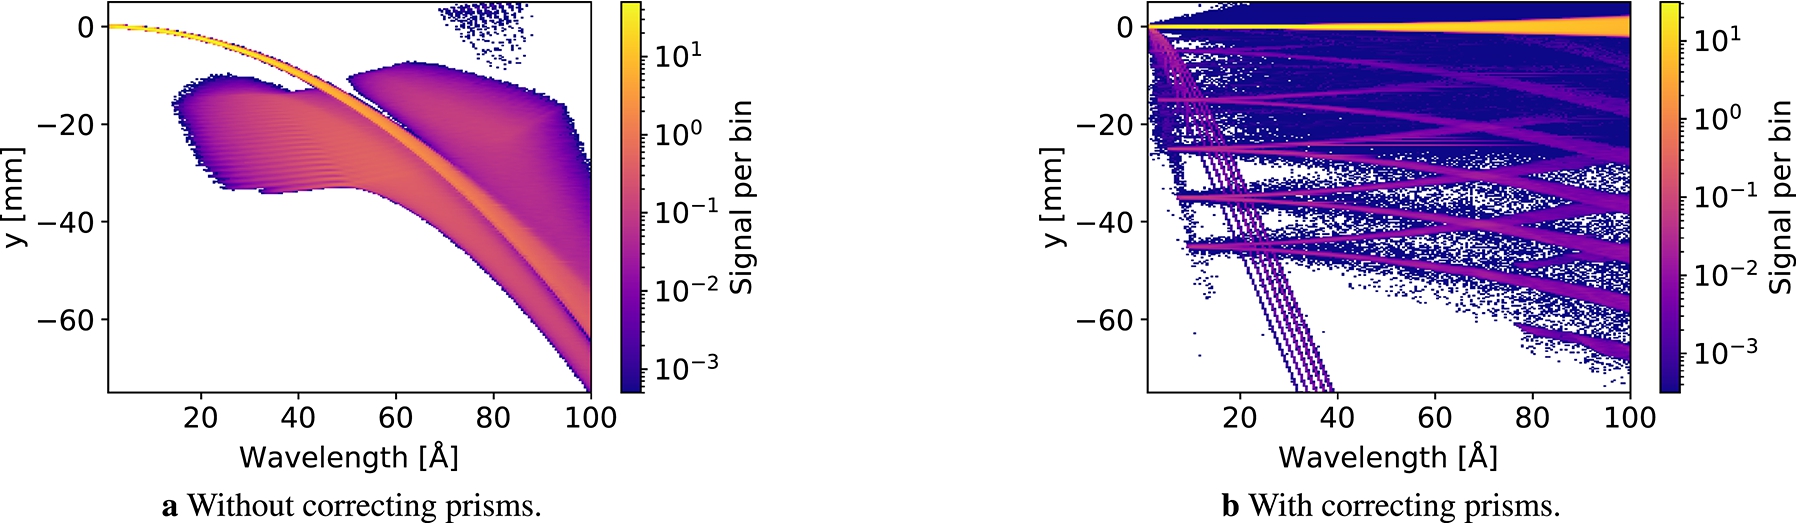 Height distribution of the focused beam as a function of wavelength.